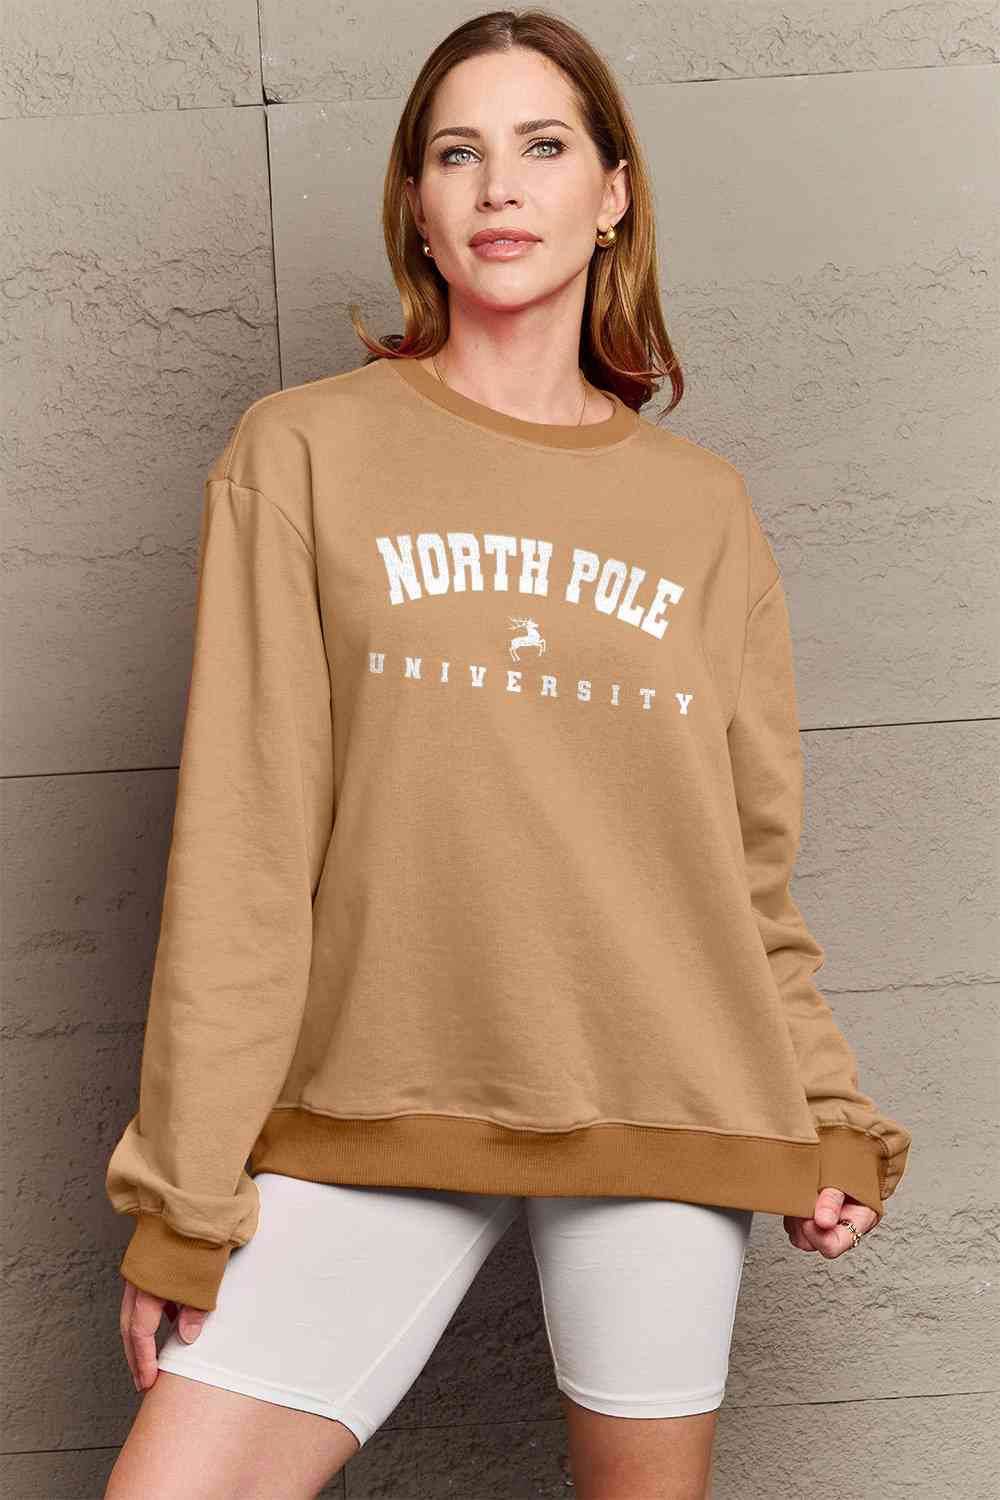 Simply Love Full Size NORTH POLE UNIVERSITY Graphic Sweatshirt - By Baano